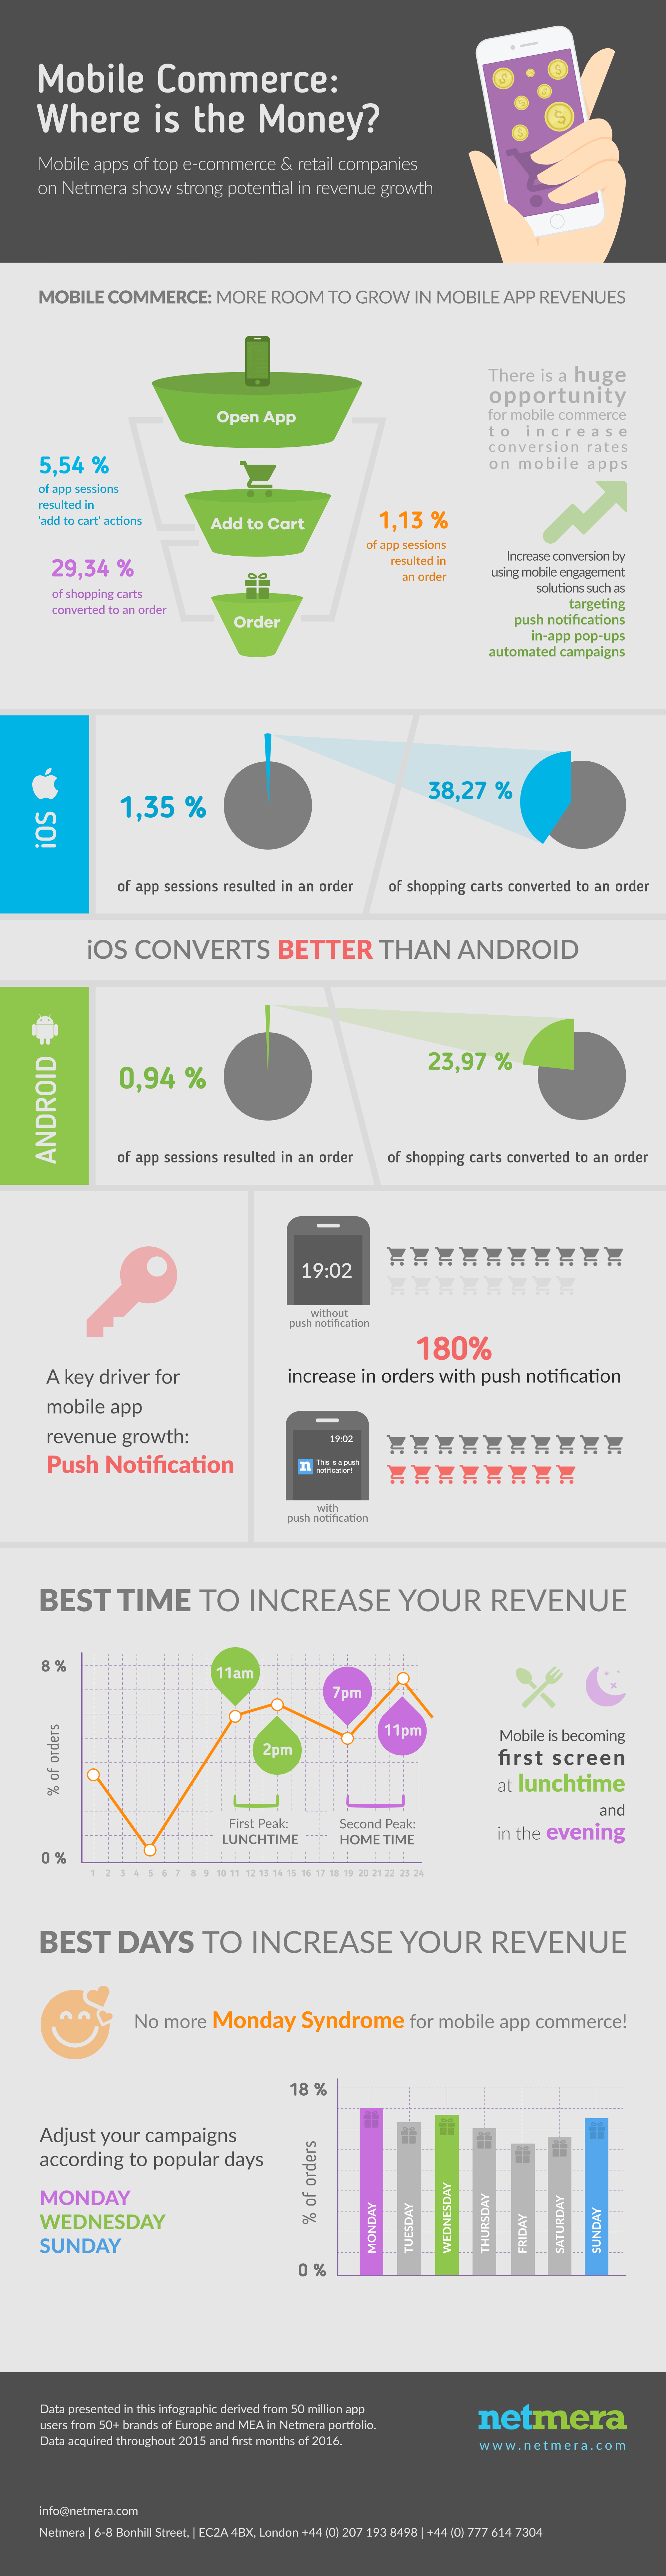 mobile commerce infographic